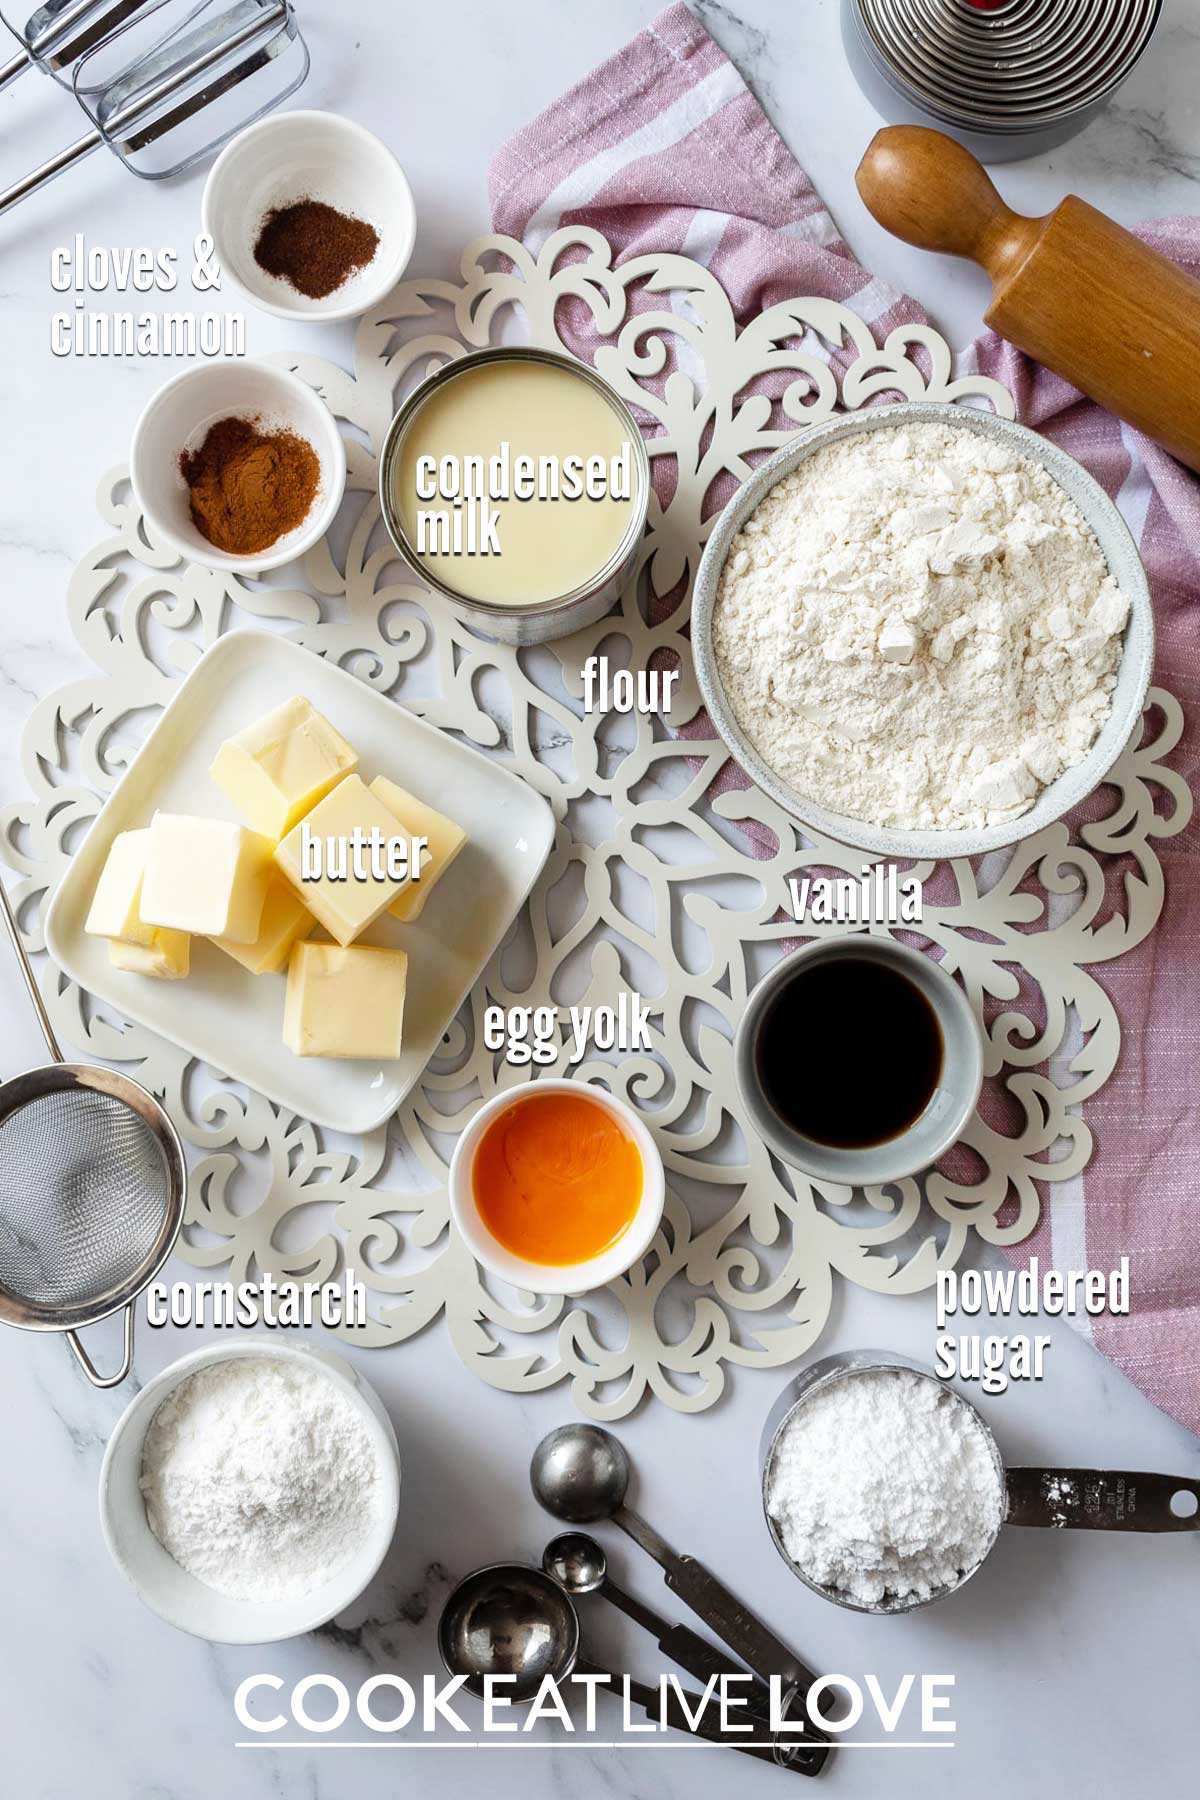 Ingredients to make alfajores peruanos on the table.